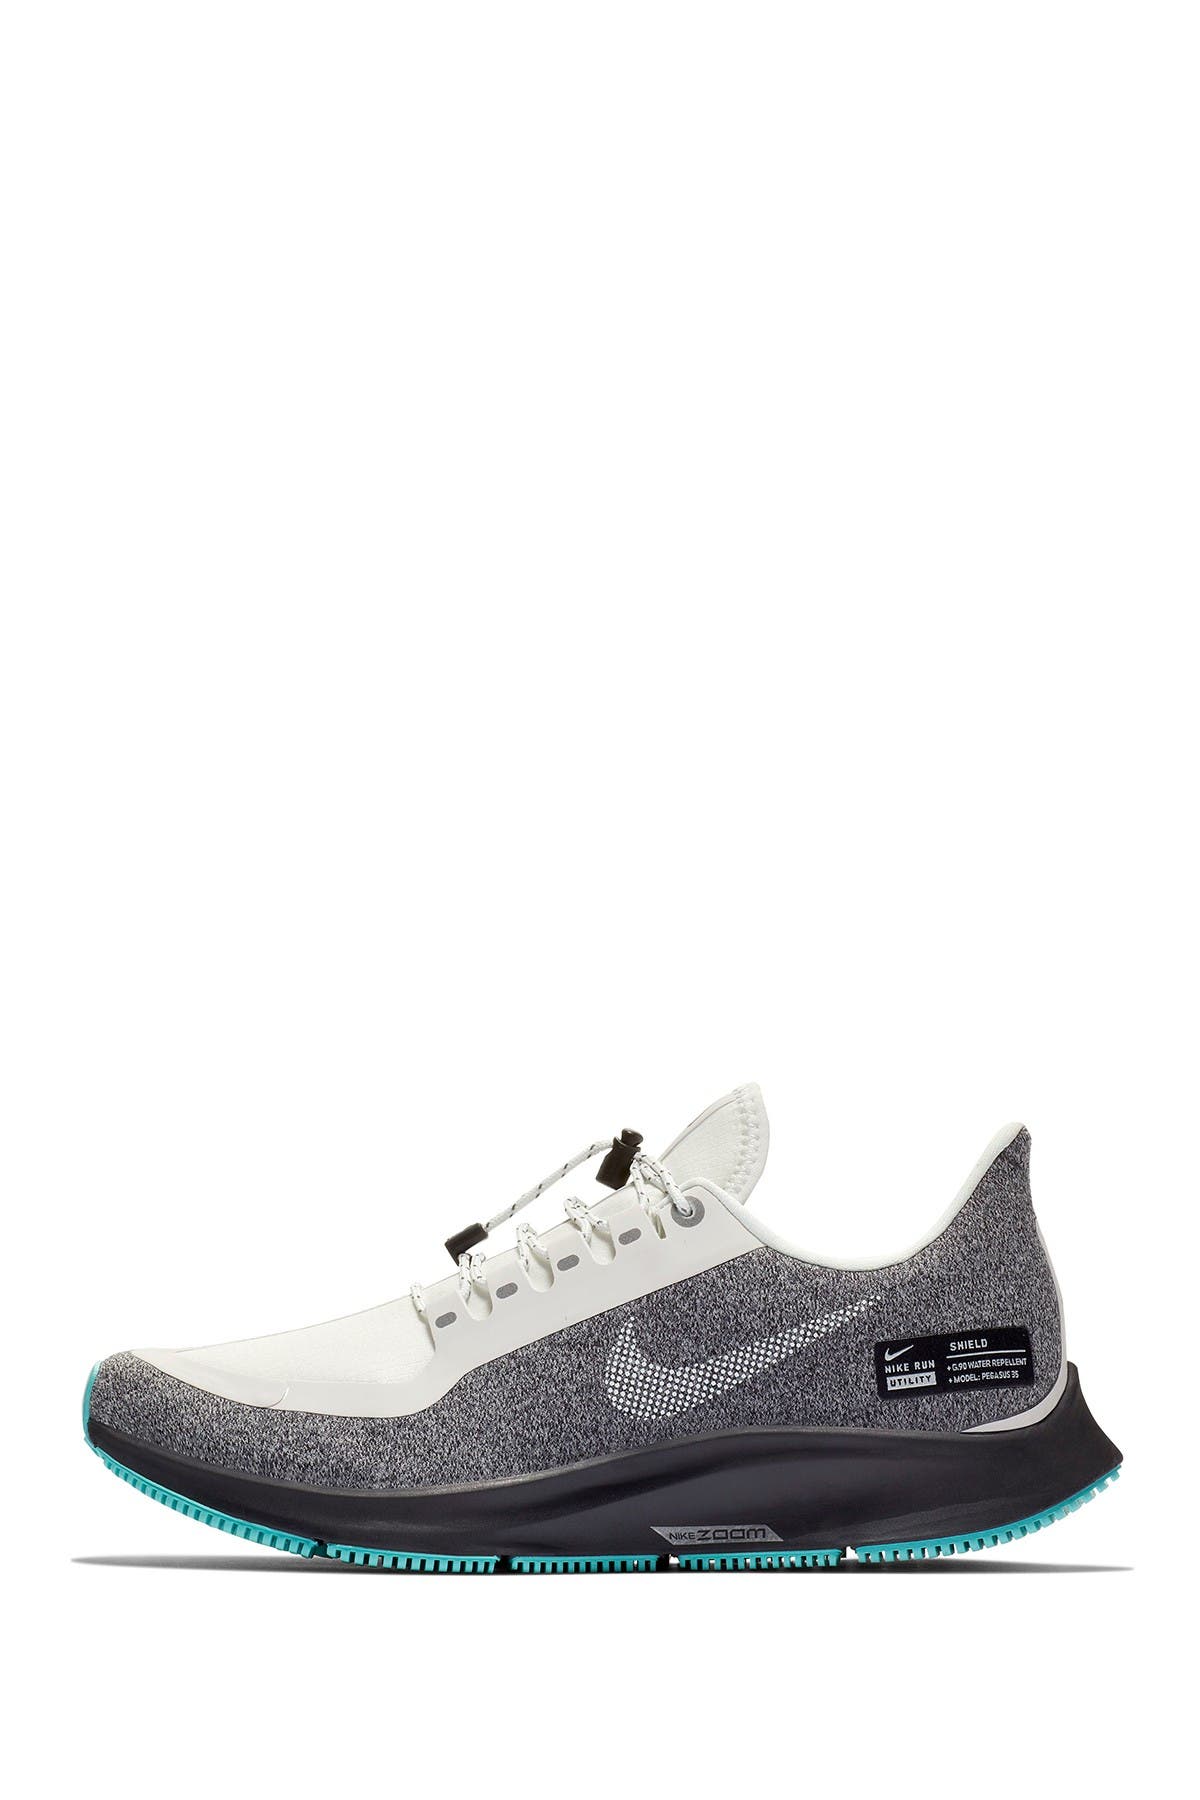 nike shield g90 water repellent